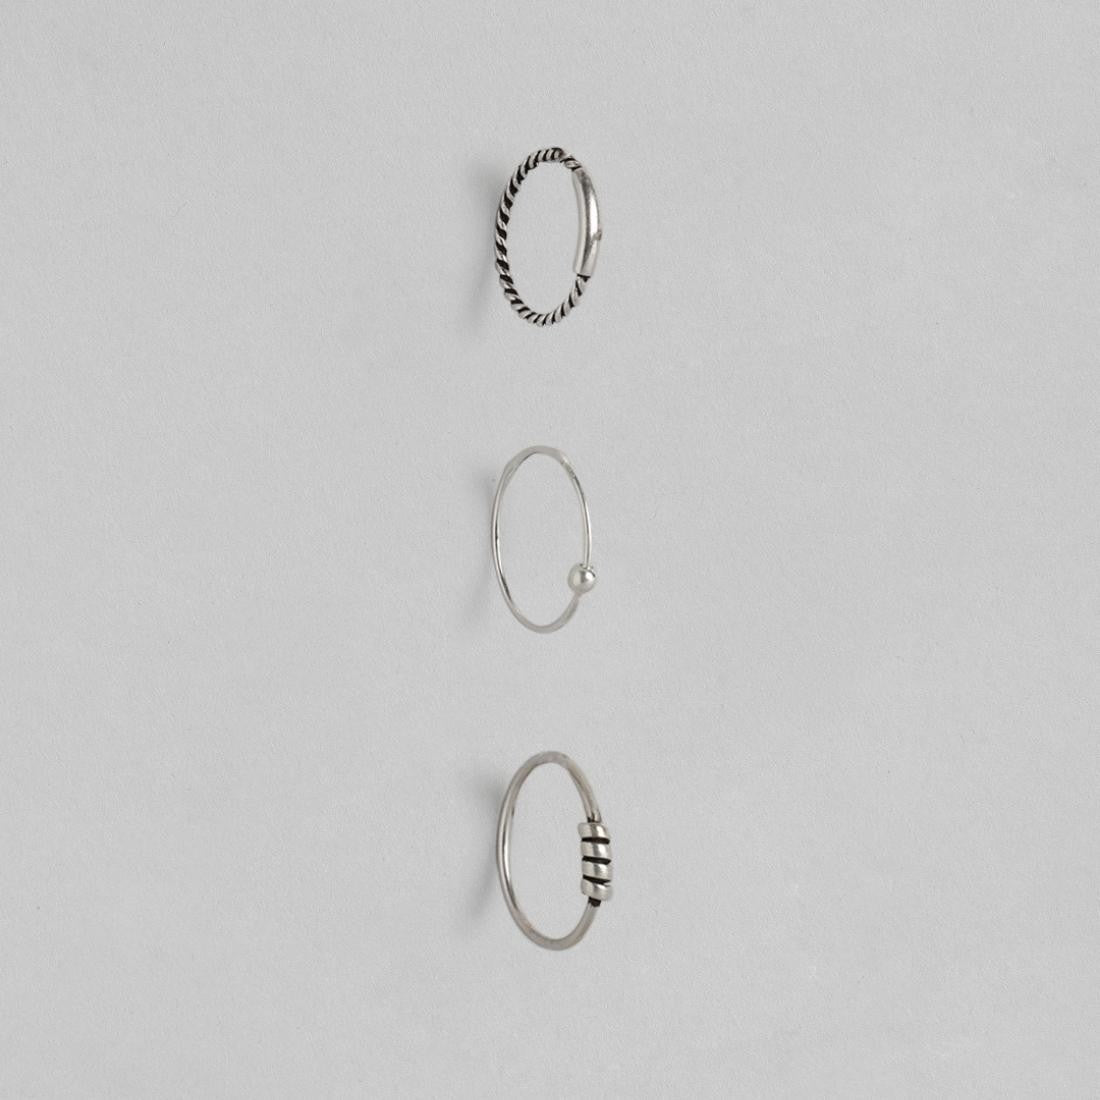 Oxidized Simple 925 Silver Nose Ring Set